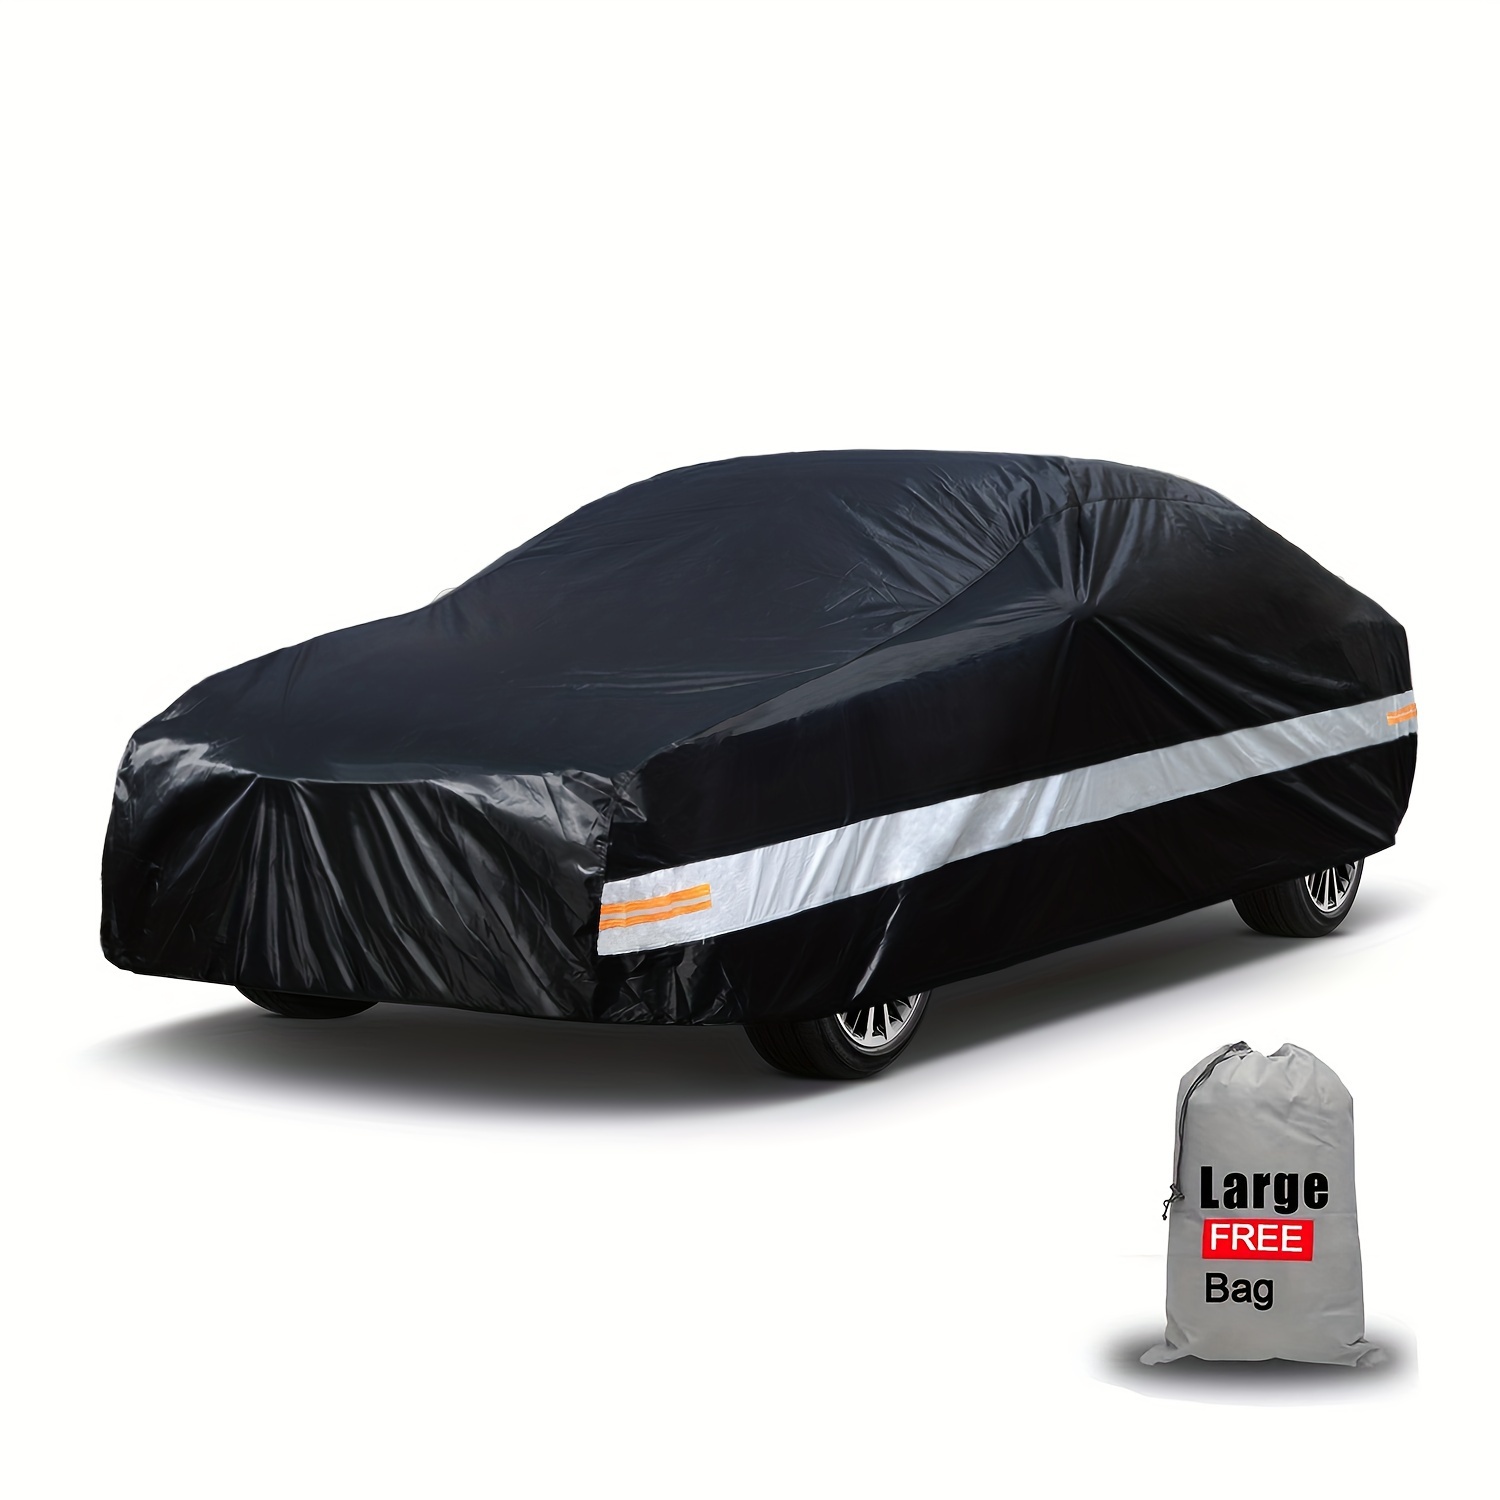 

Car Cover Waterproof All Weather For Automobiles, Universal Mustang For For Audi A4/a5 For Toyota Camry Solara For Hyundai Sonata For Vw Etc. (fit Sedan, 185"-193")